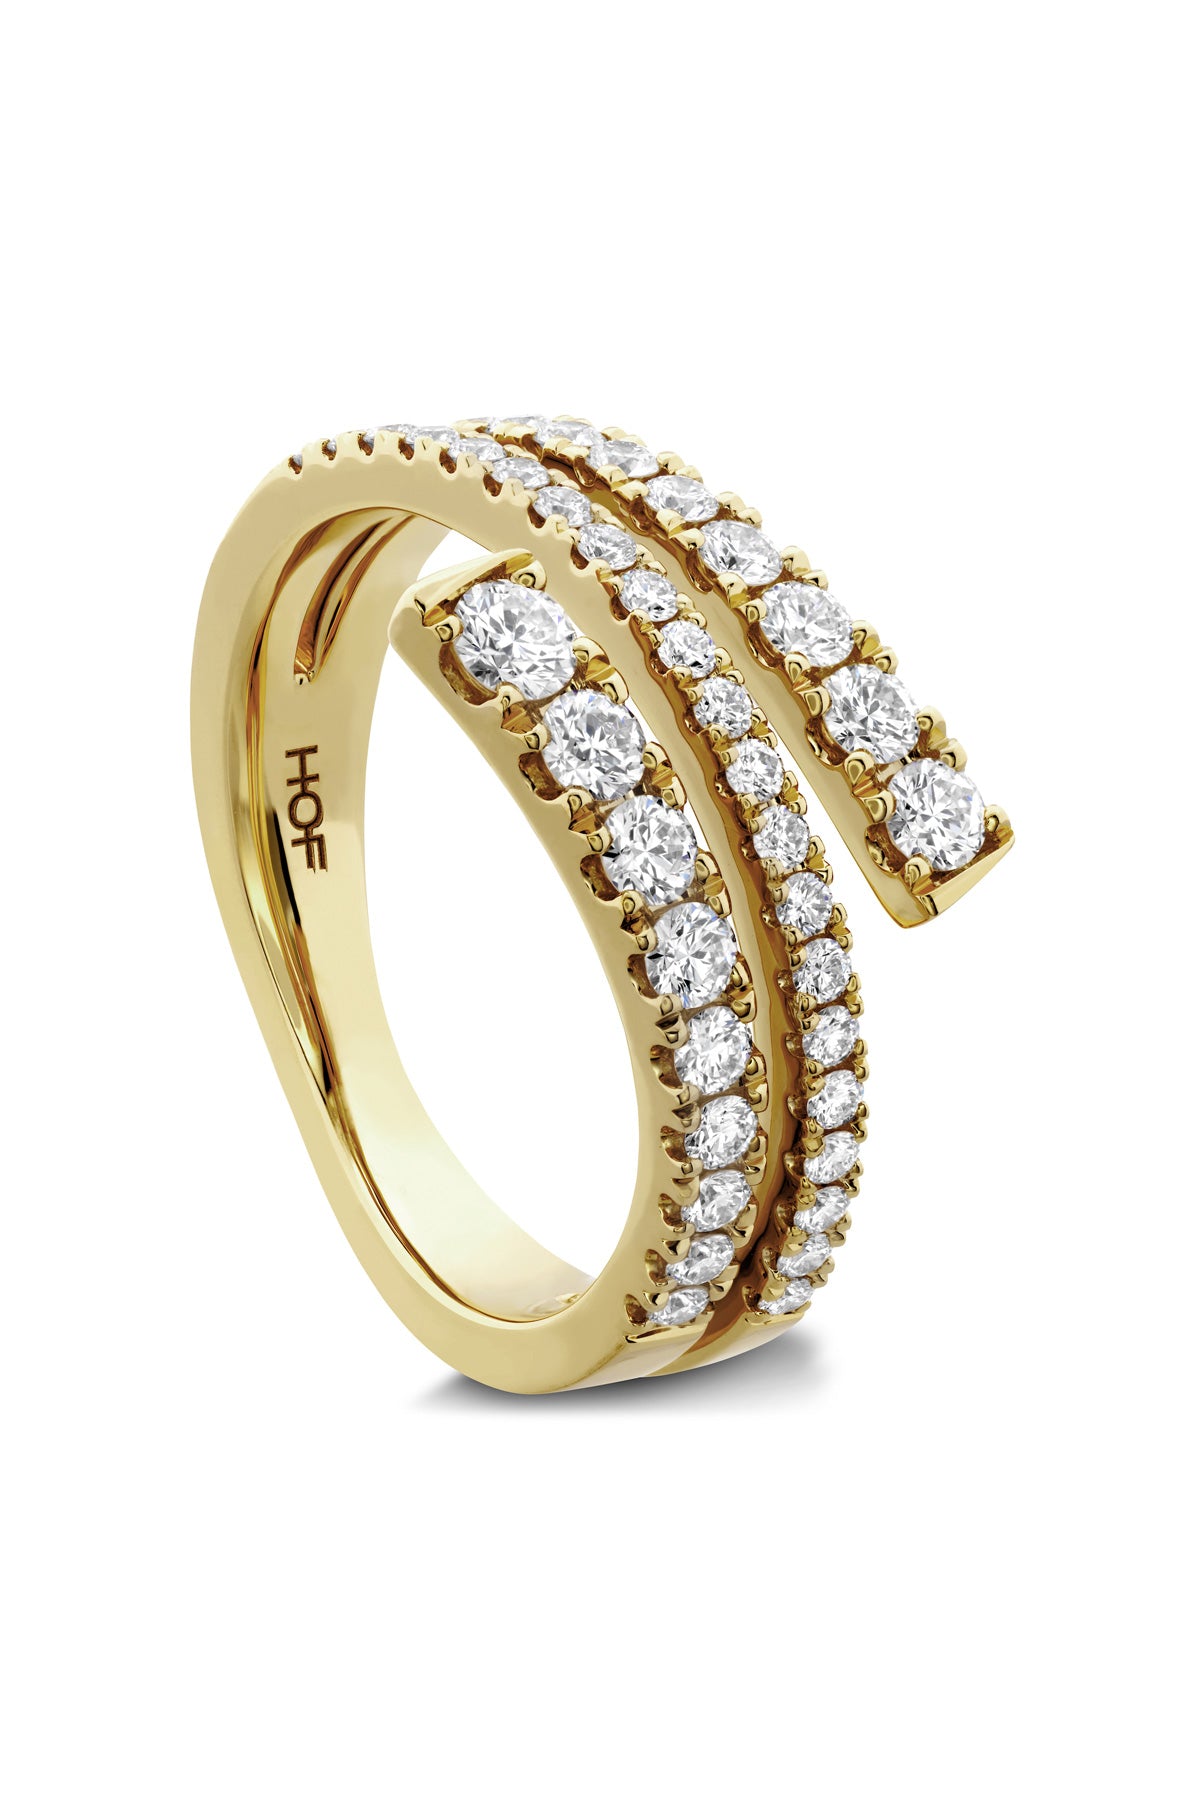 Grace Wrap Ring From Hearts On Fire available at LeGassick Diamonds and Jewellery Gold Coast, Australia.